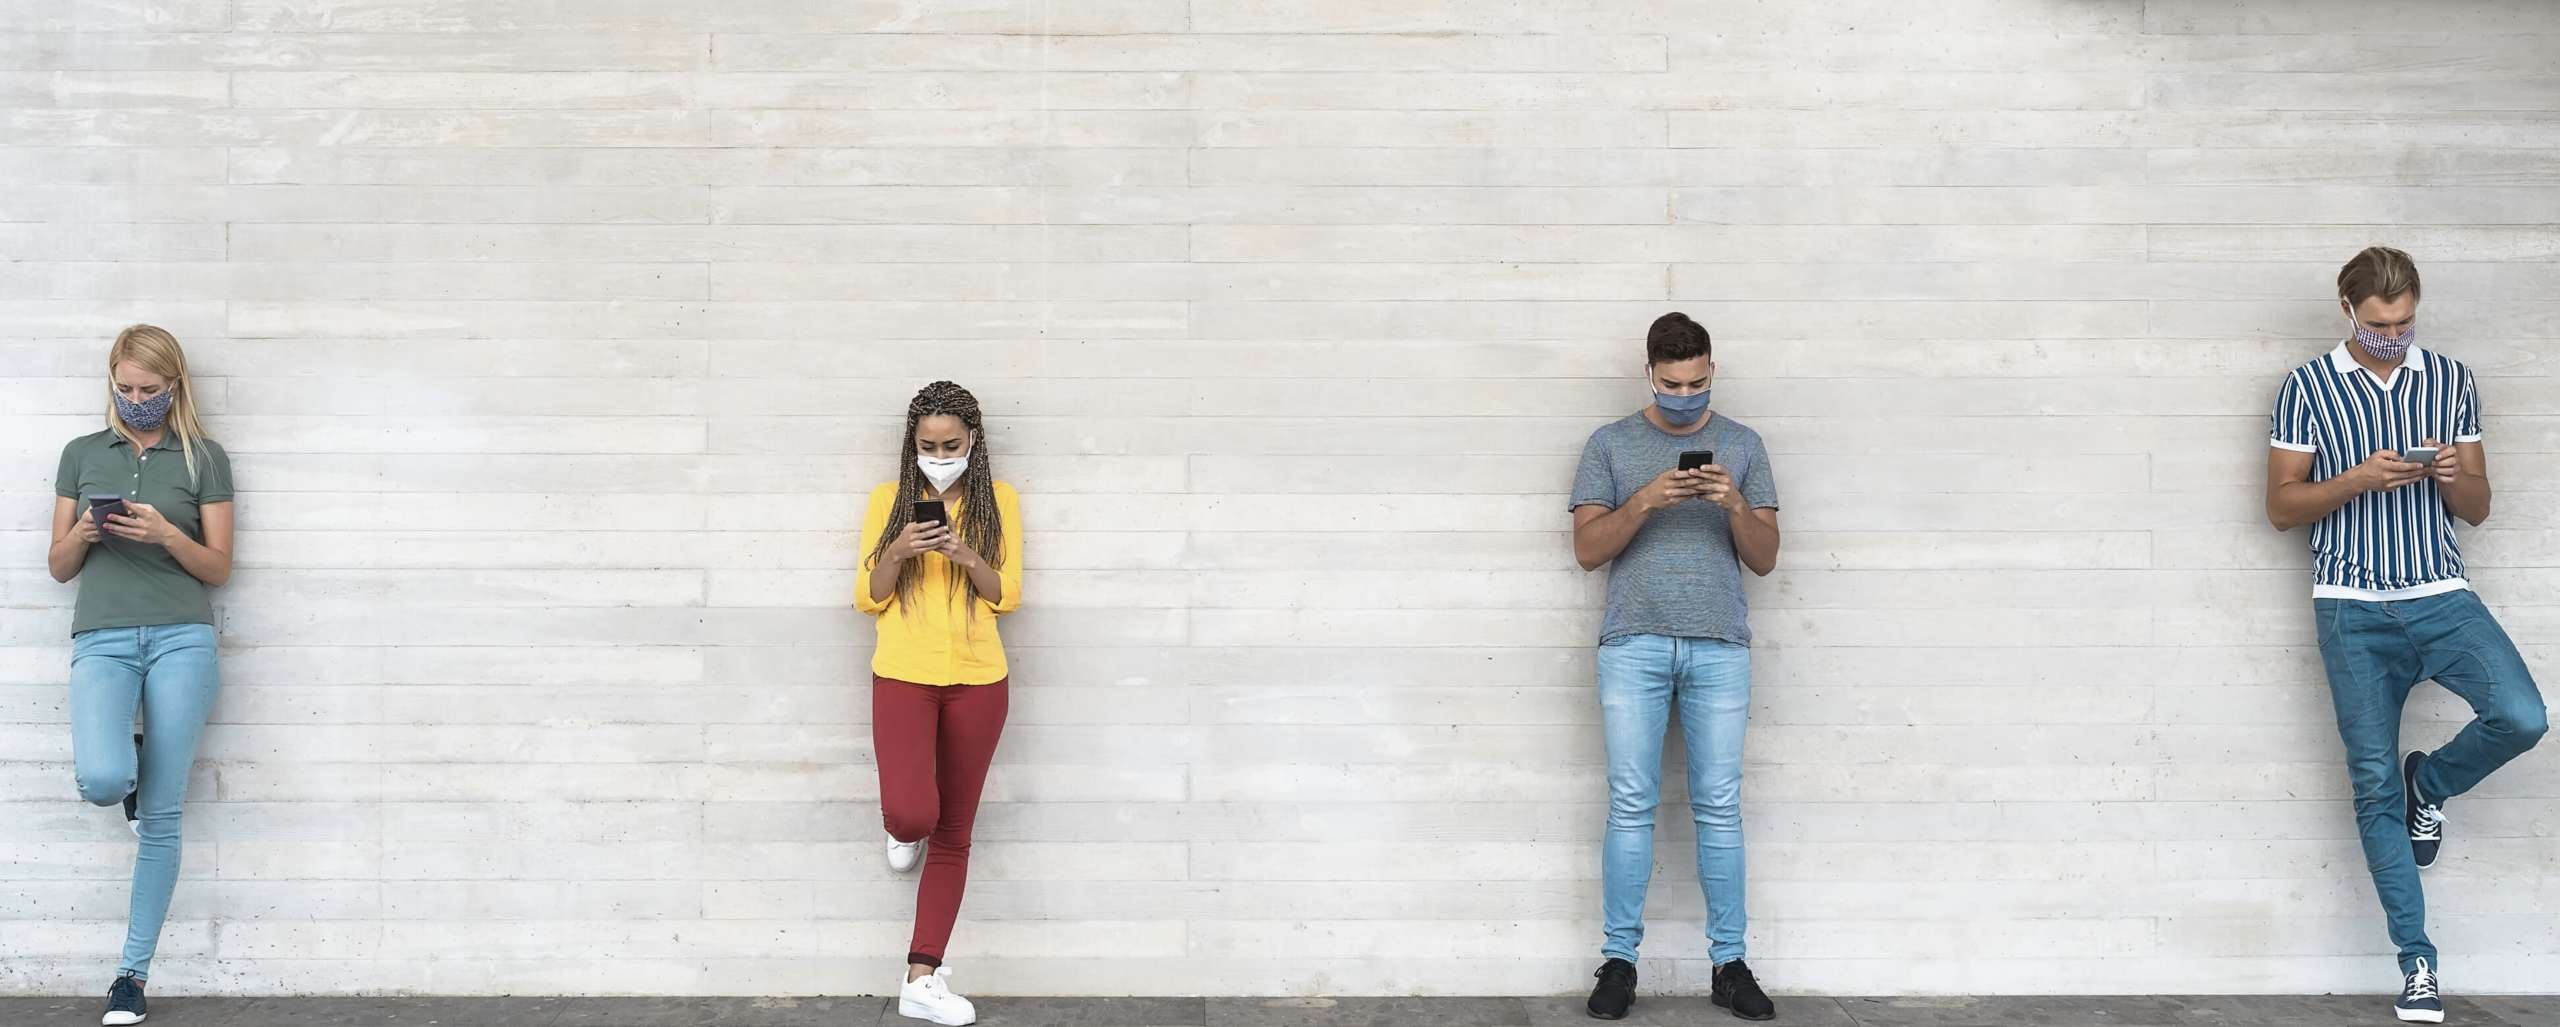 People standing six feet apart, looking at phones, and wearing masks